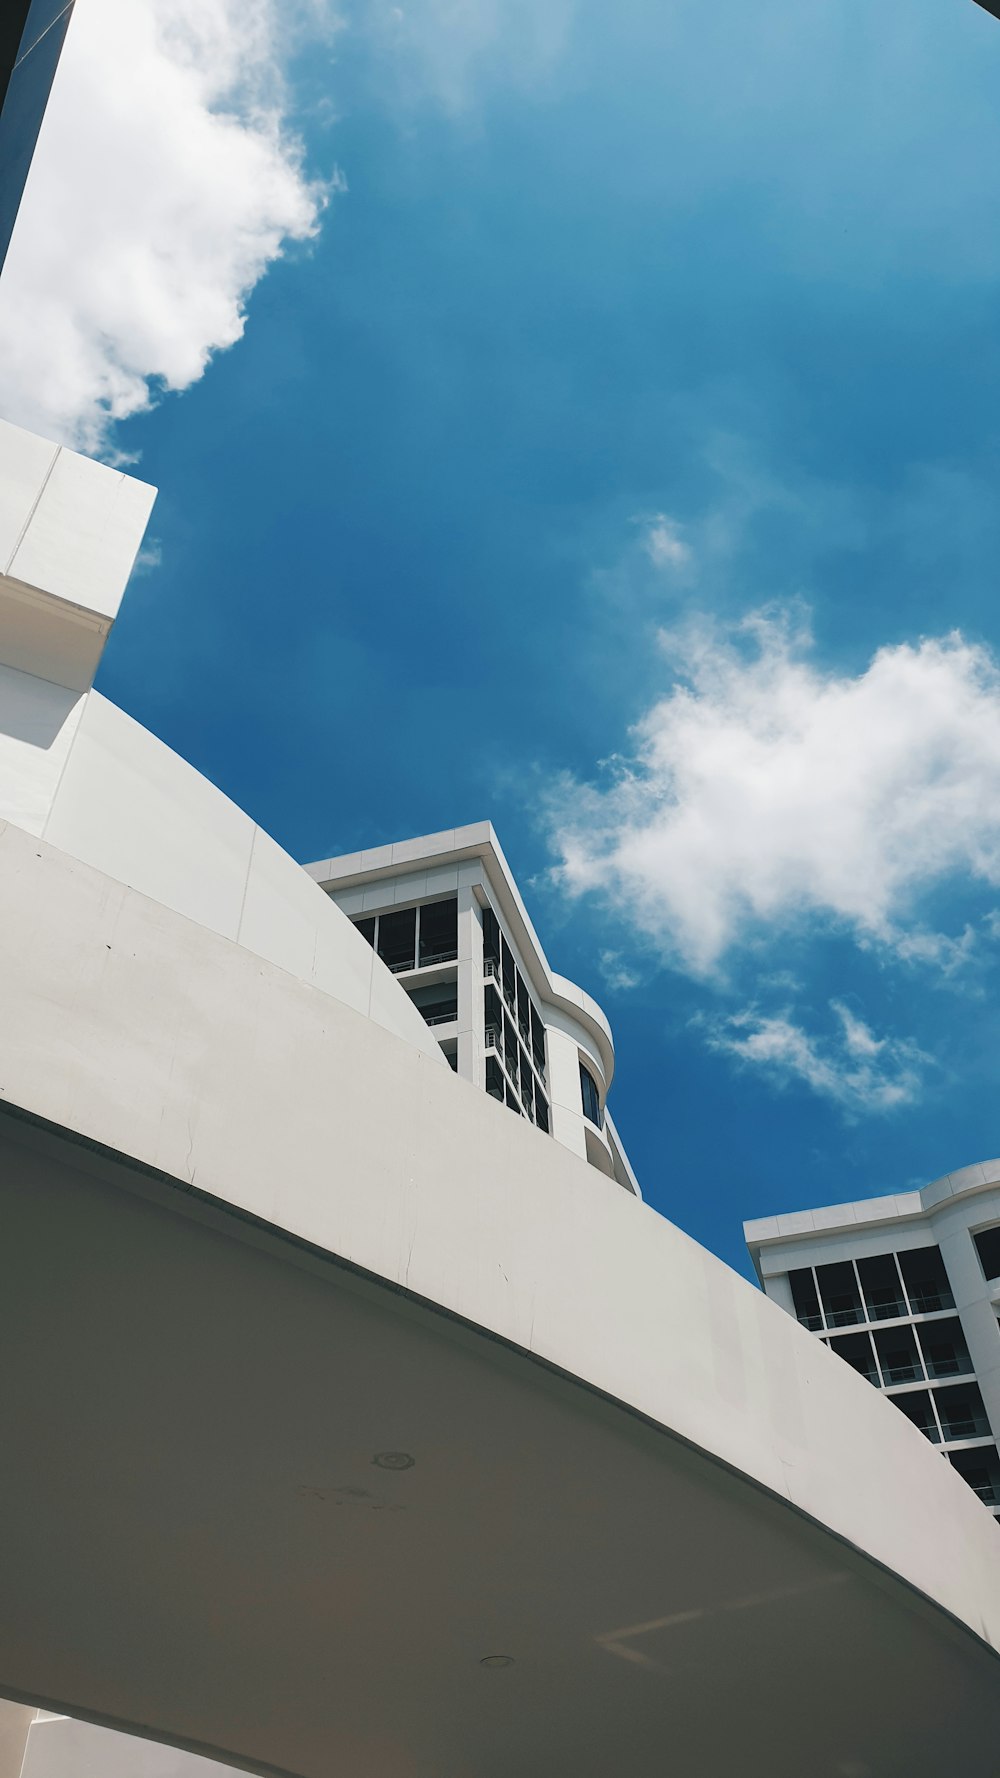 white painted building under white clouds